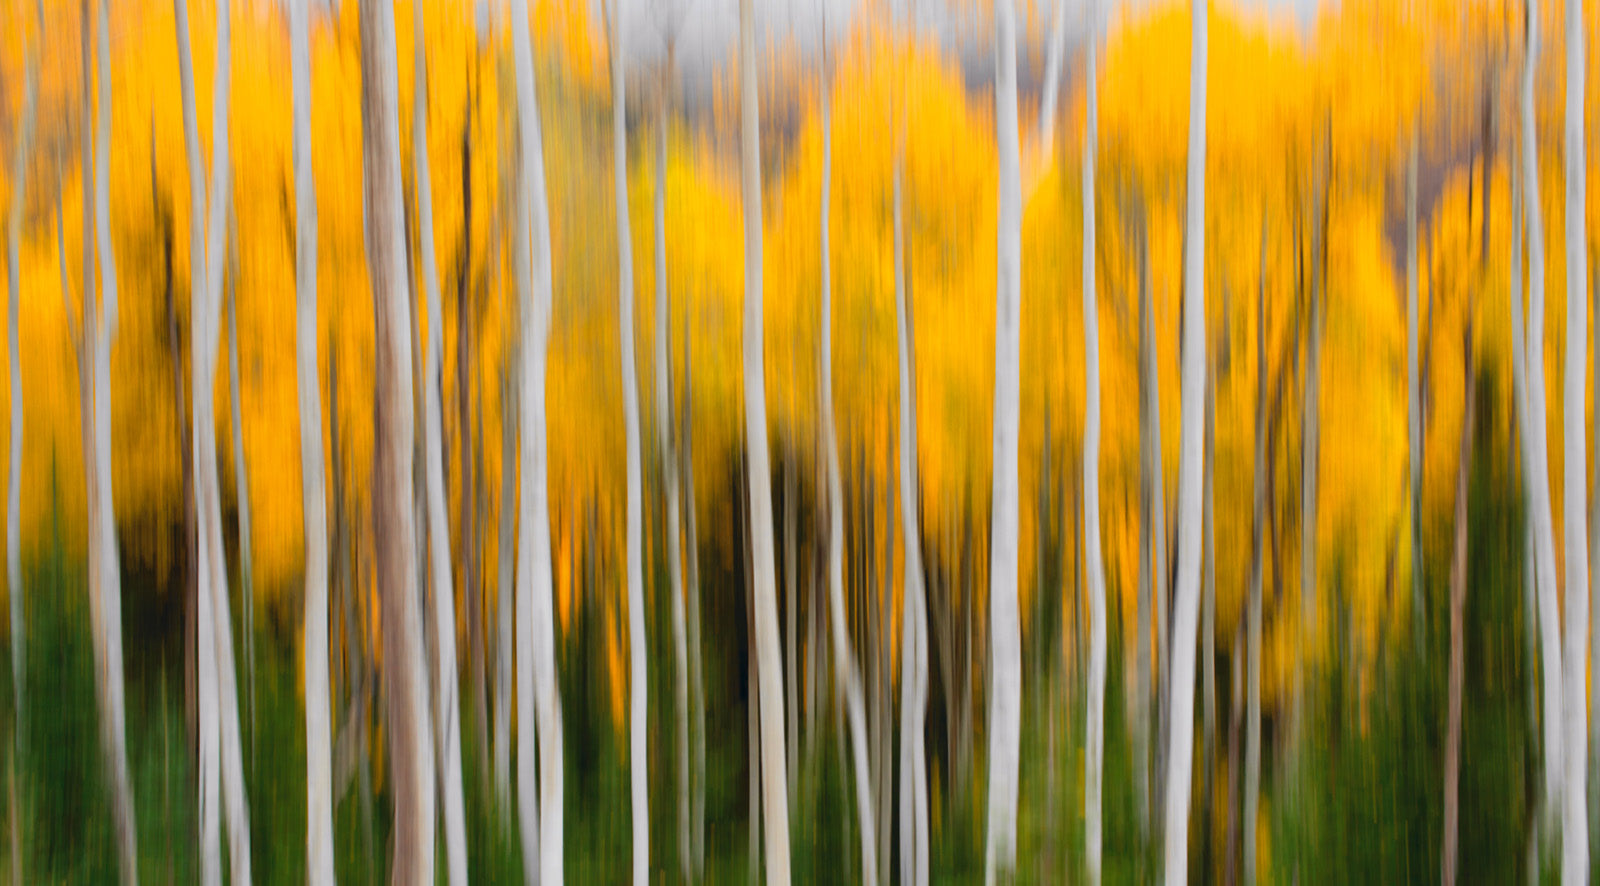 What is Abstract Landscape Photography?